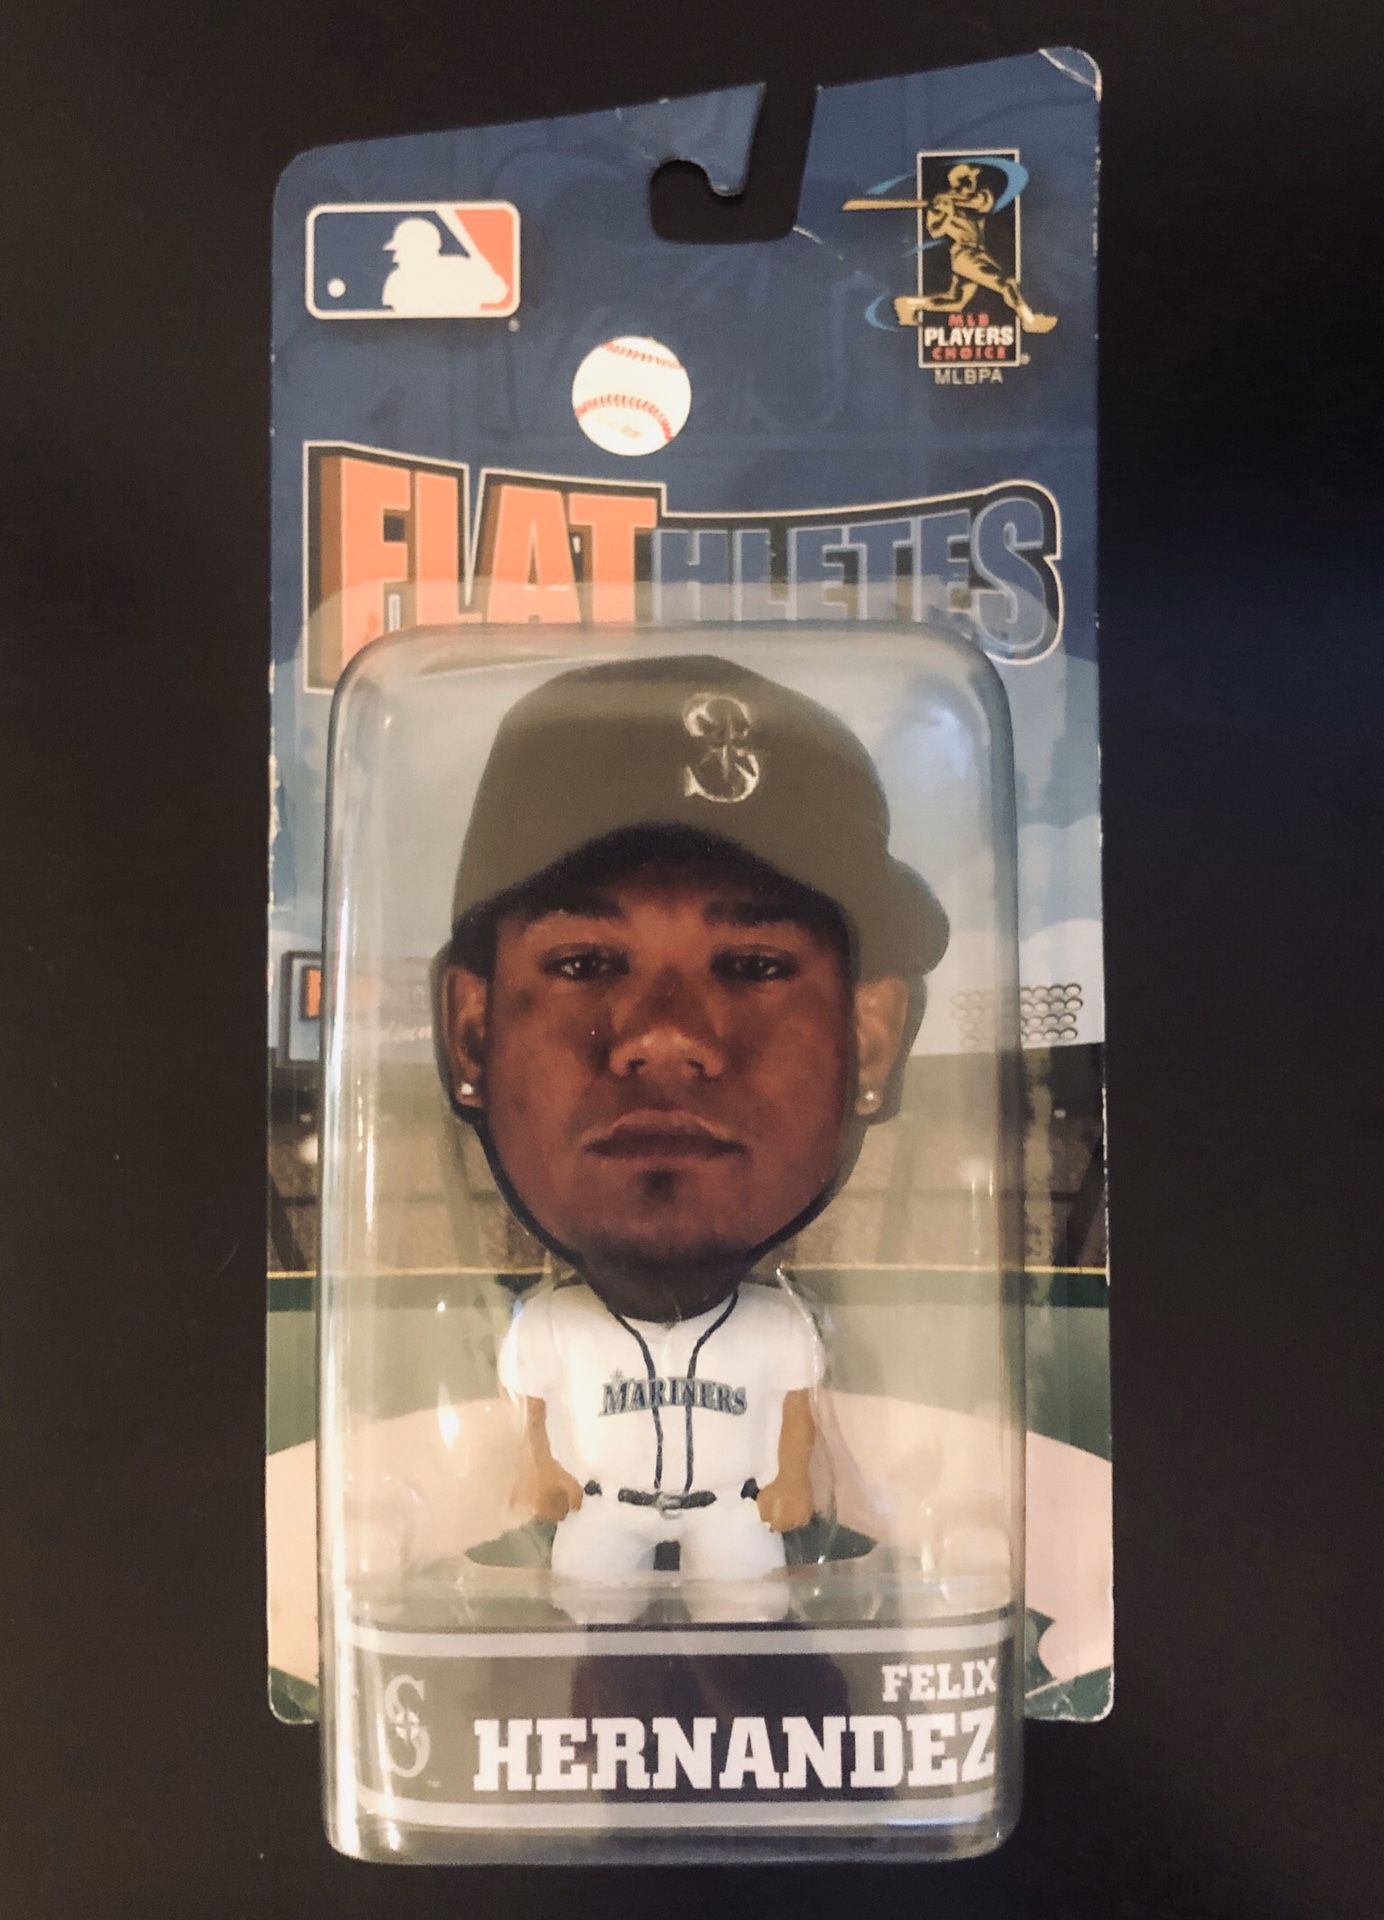 Felix Hernandez Seattle Mariners MLB Baseball Flathletes Action Figure Toy 5” Forever Collectibles - BRAND NEW!